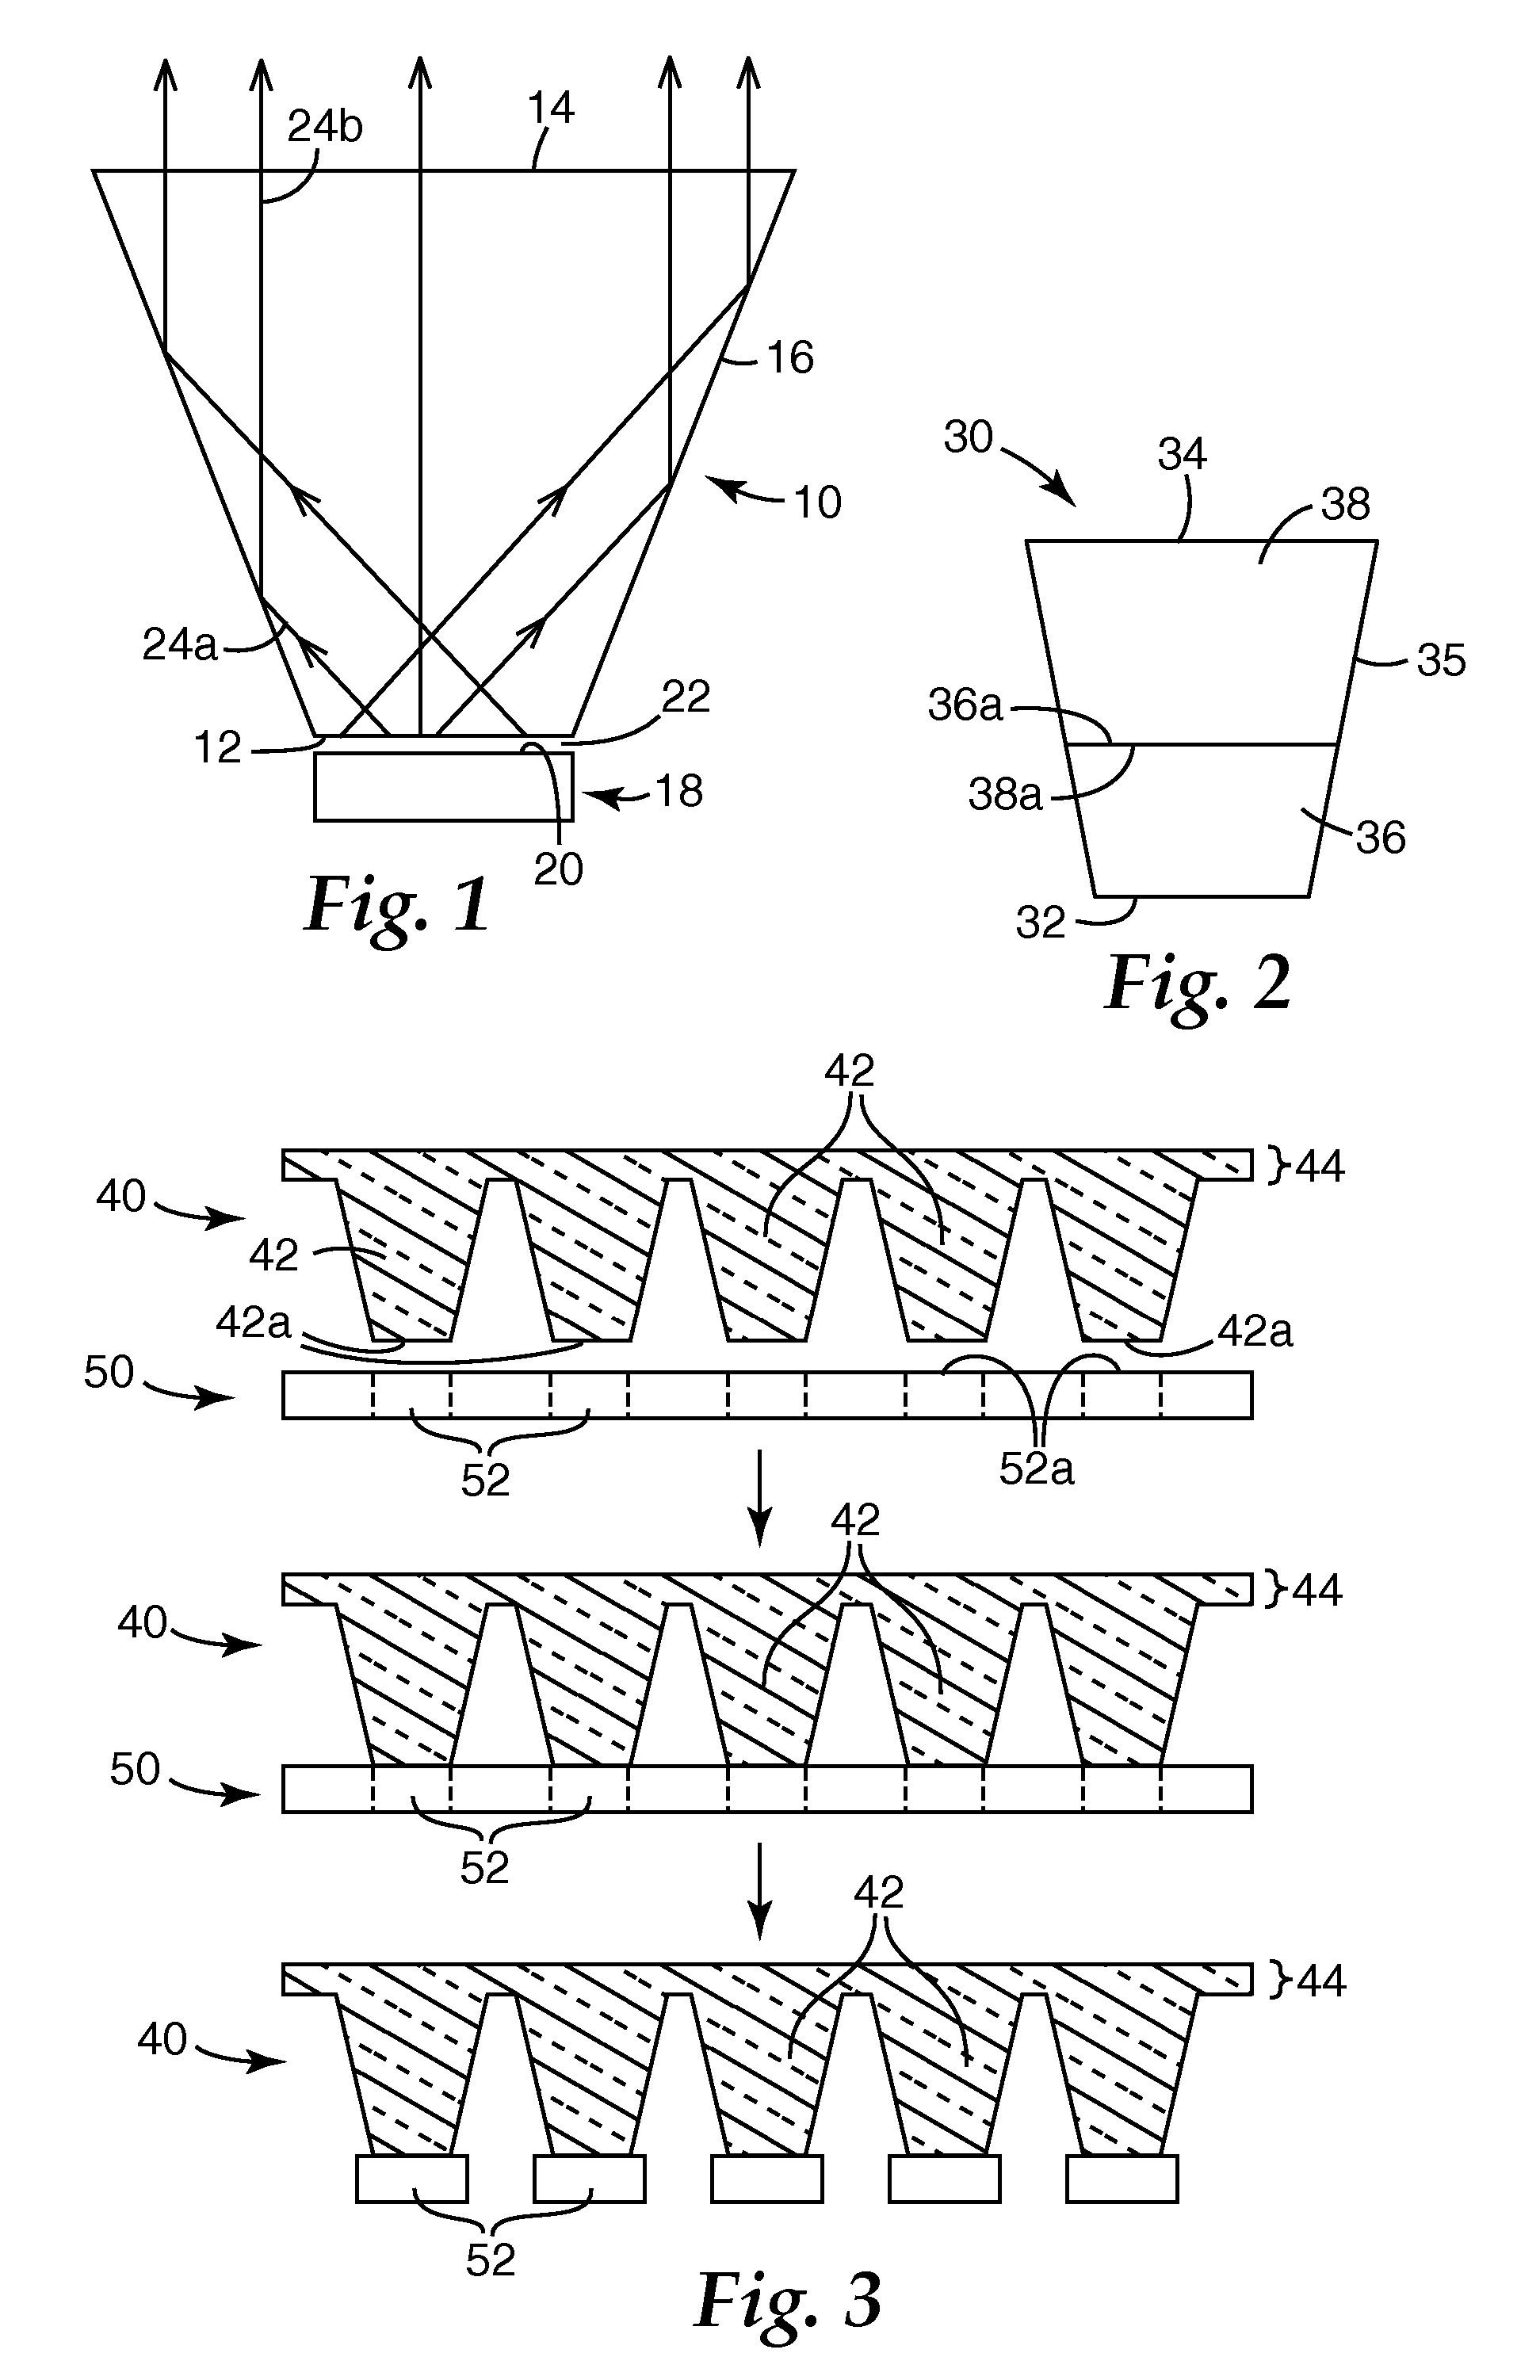 Methods of Making LED Extractor Arrays